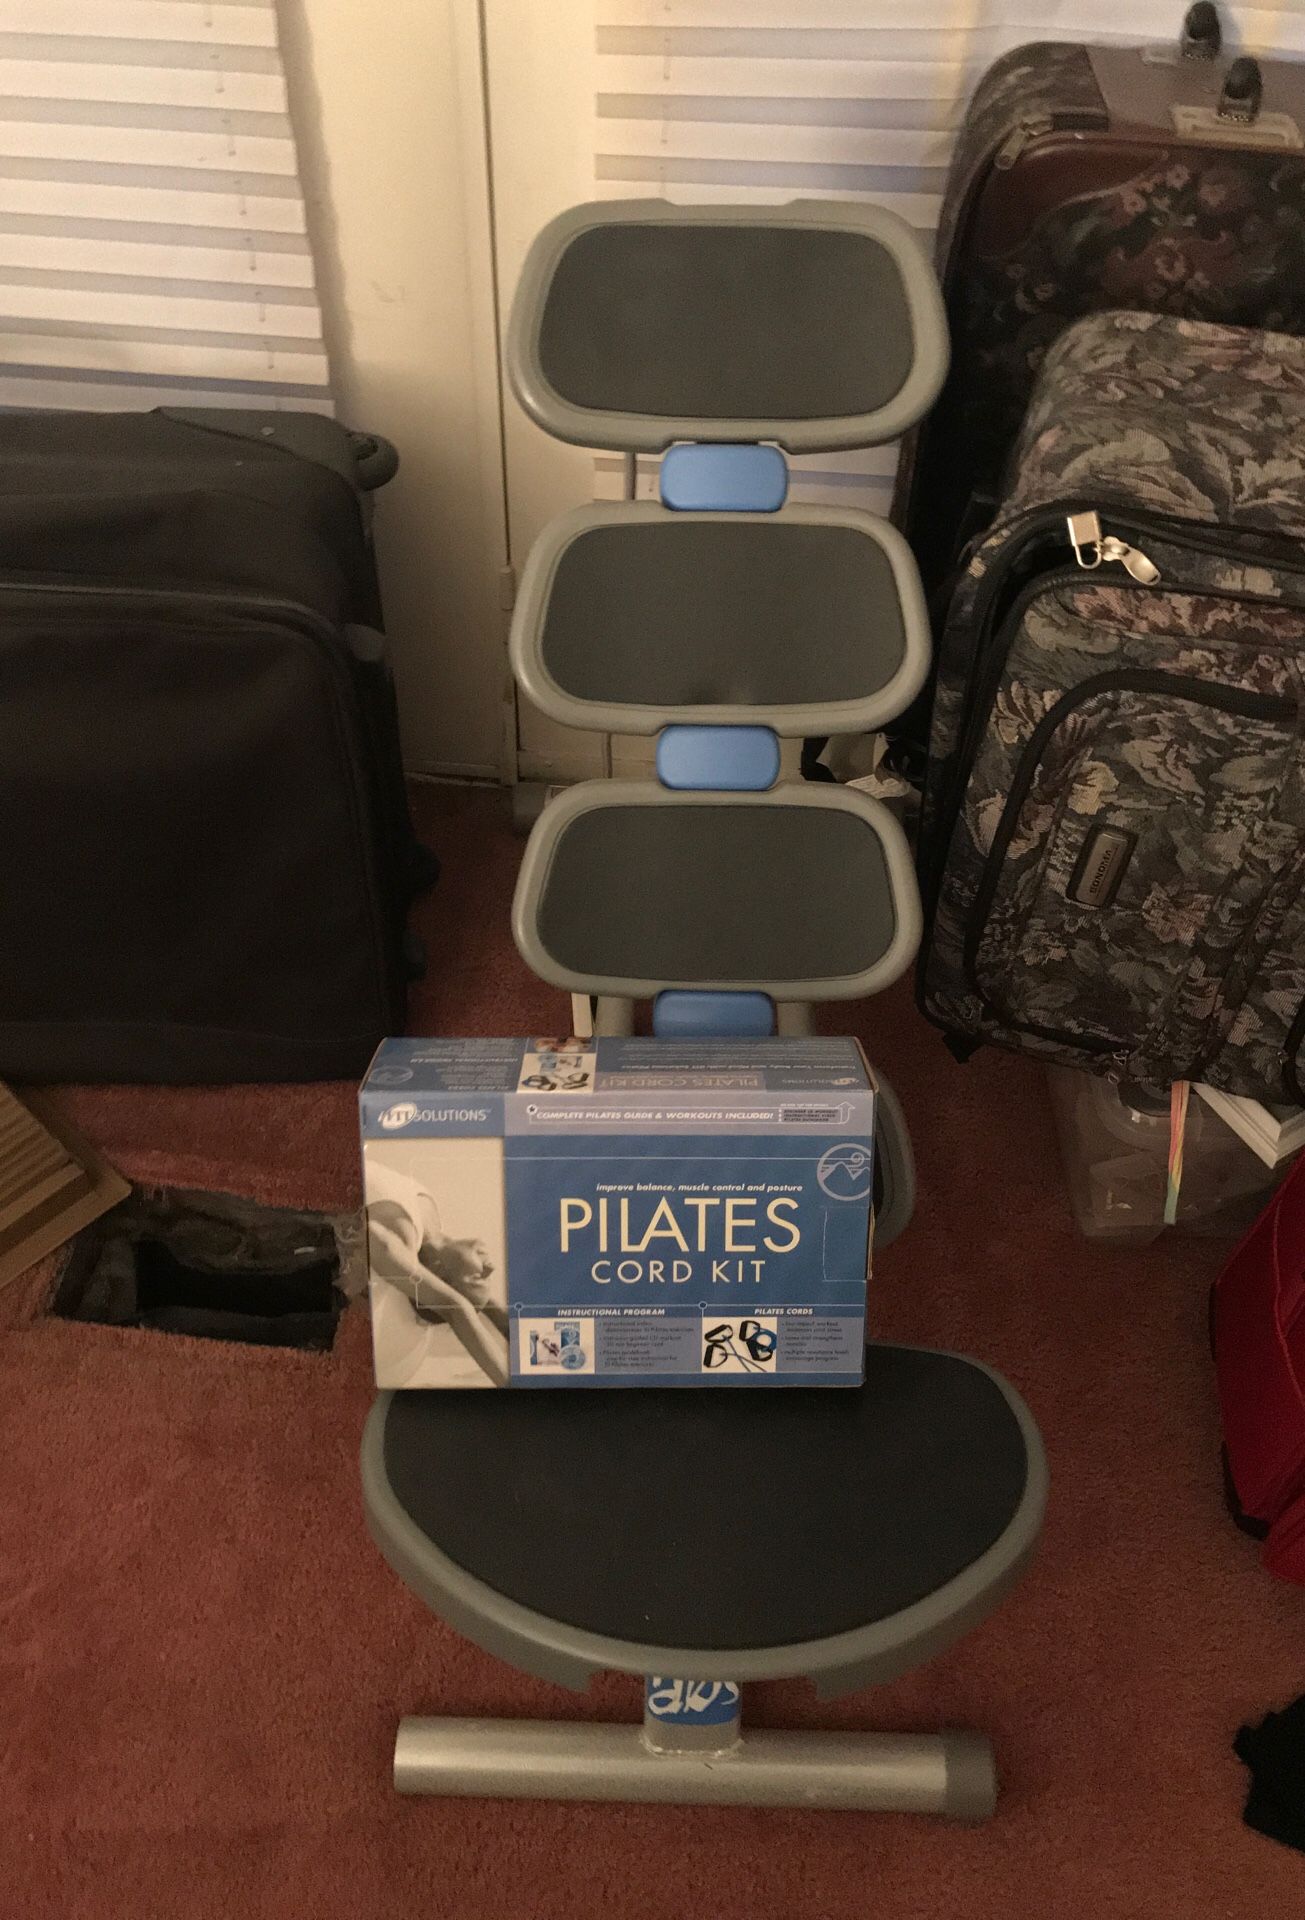 Ab lounger with Pilates cord kit